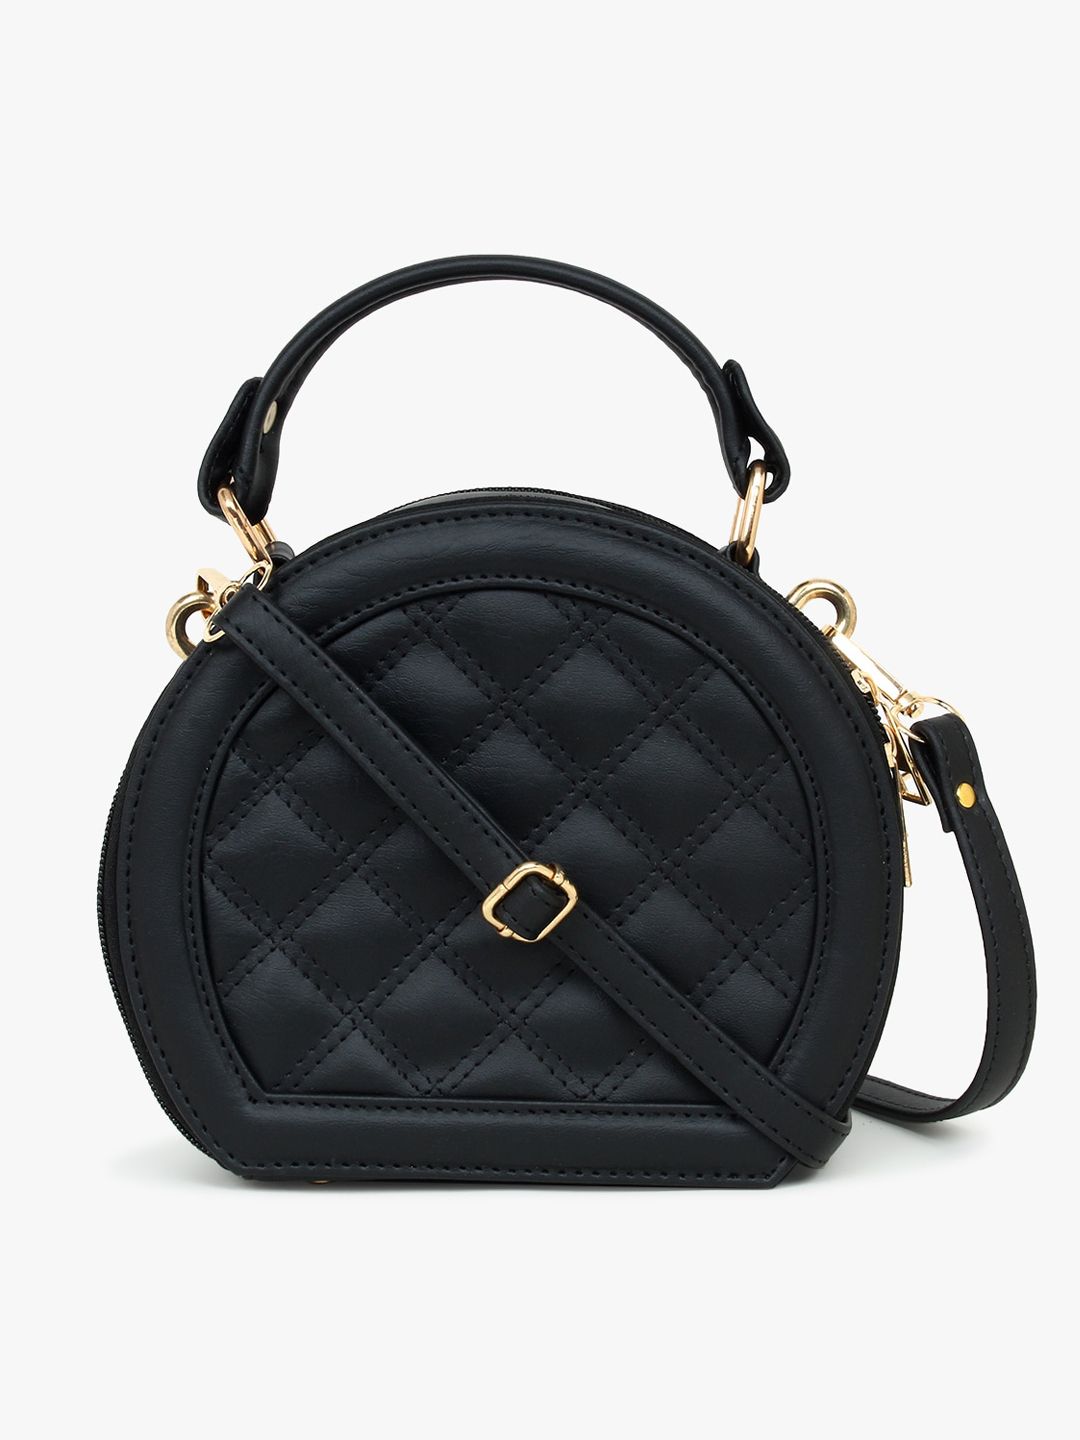 LEGAL BRIBE Black Textured PU Structured Sling Bag with Quilted Price in India